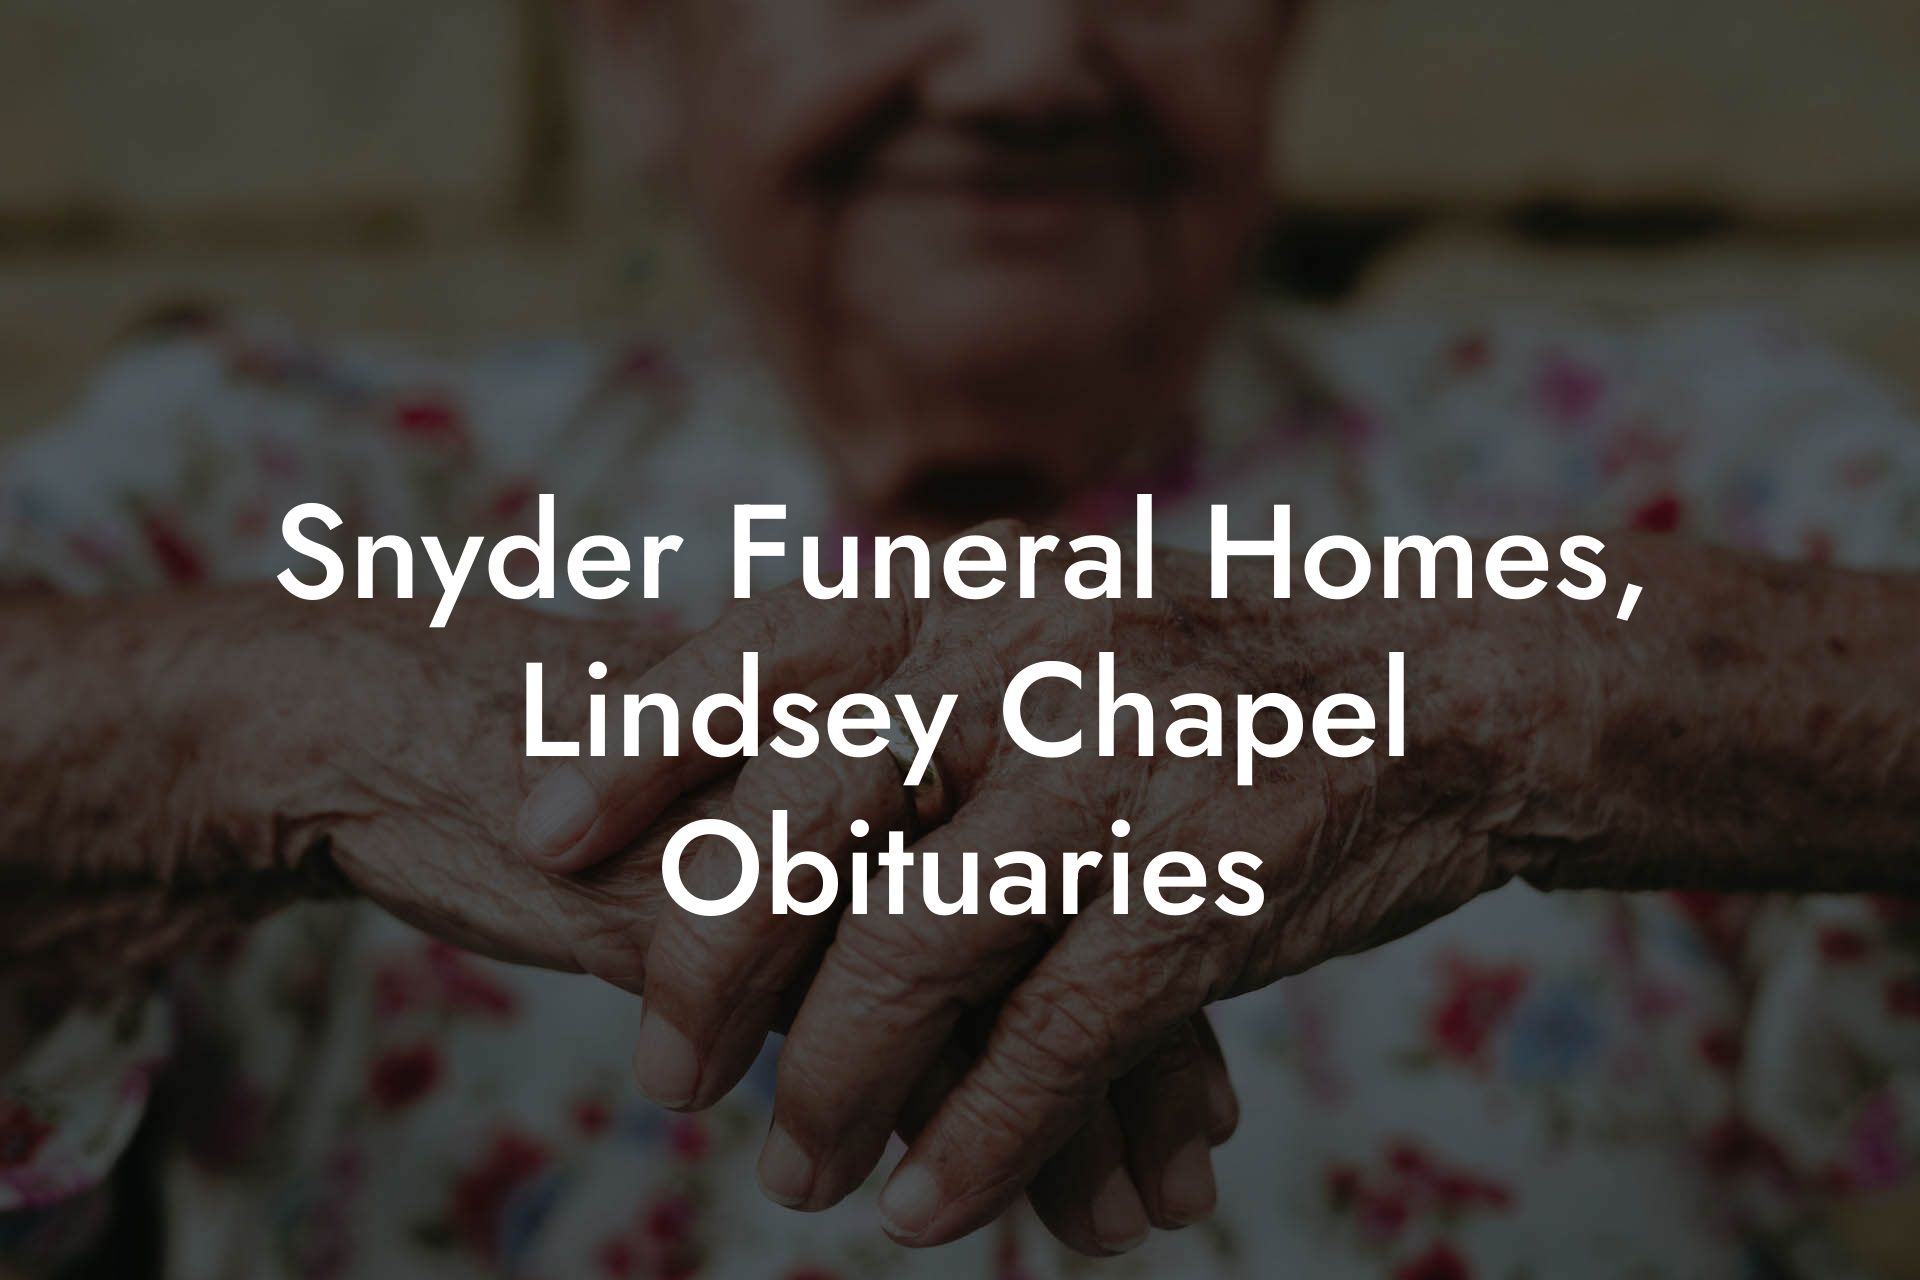 Snyder Funeral Homes, Lindsey Chapel Obituaries